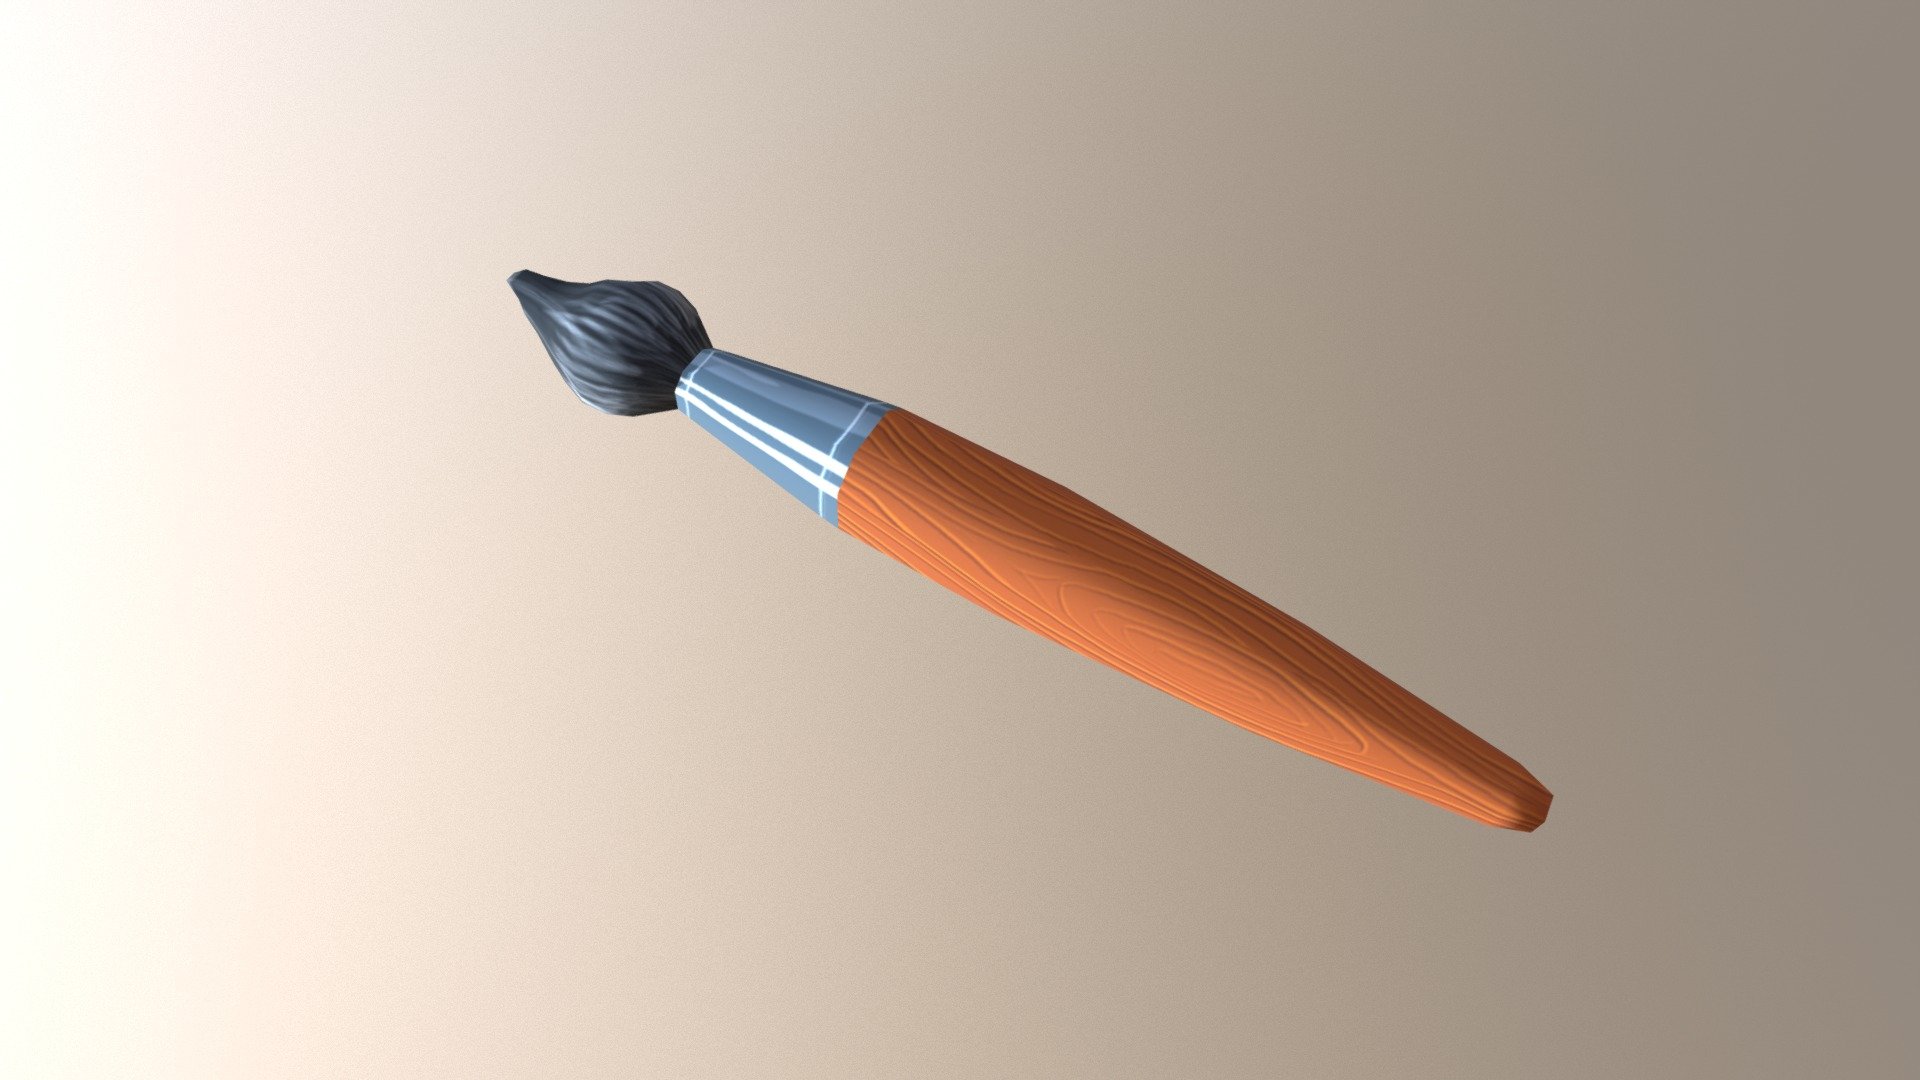 I created this brush for our small game in Game Jam. We had limited time so it's simple and doesn't have details. 
There is 512x512 texture and 416 tris 3d model